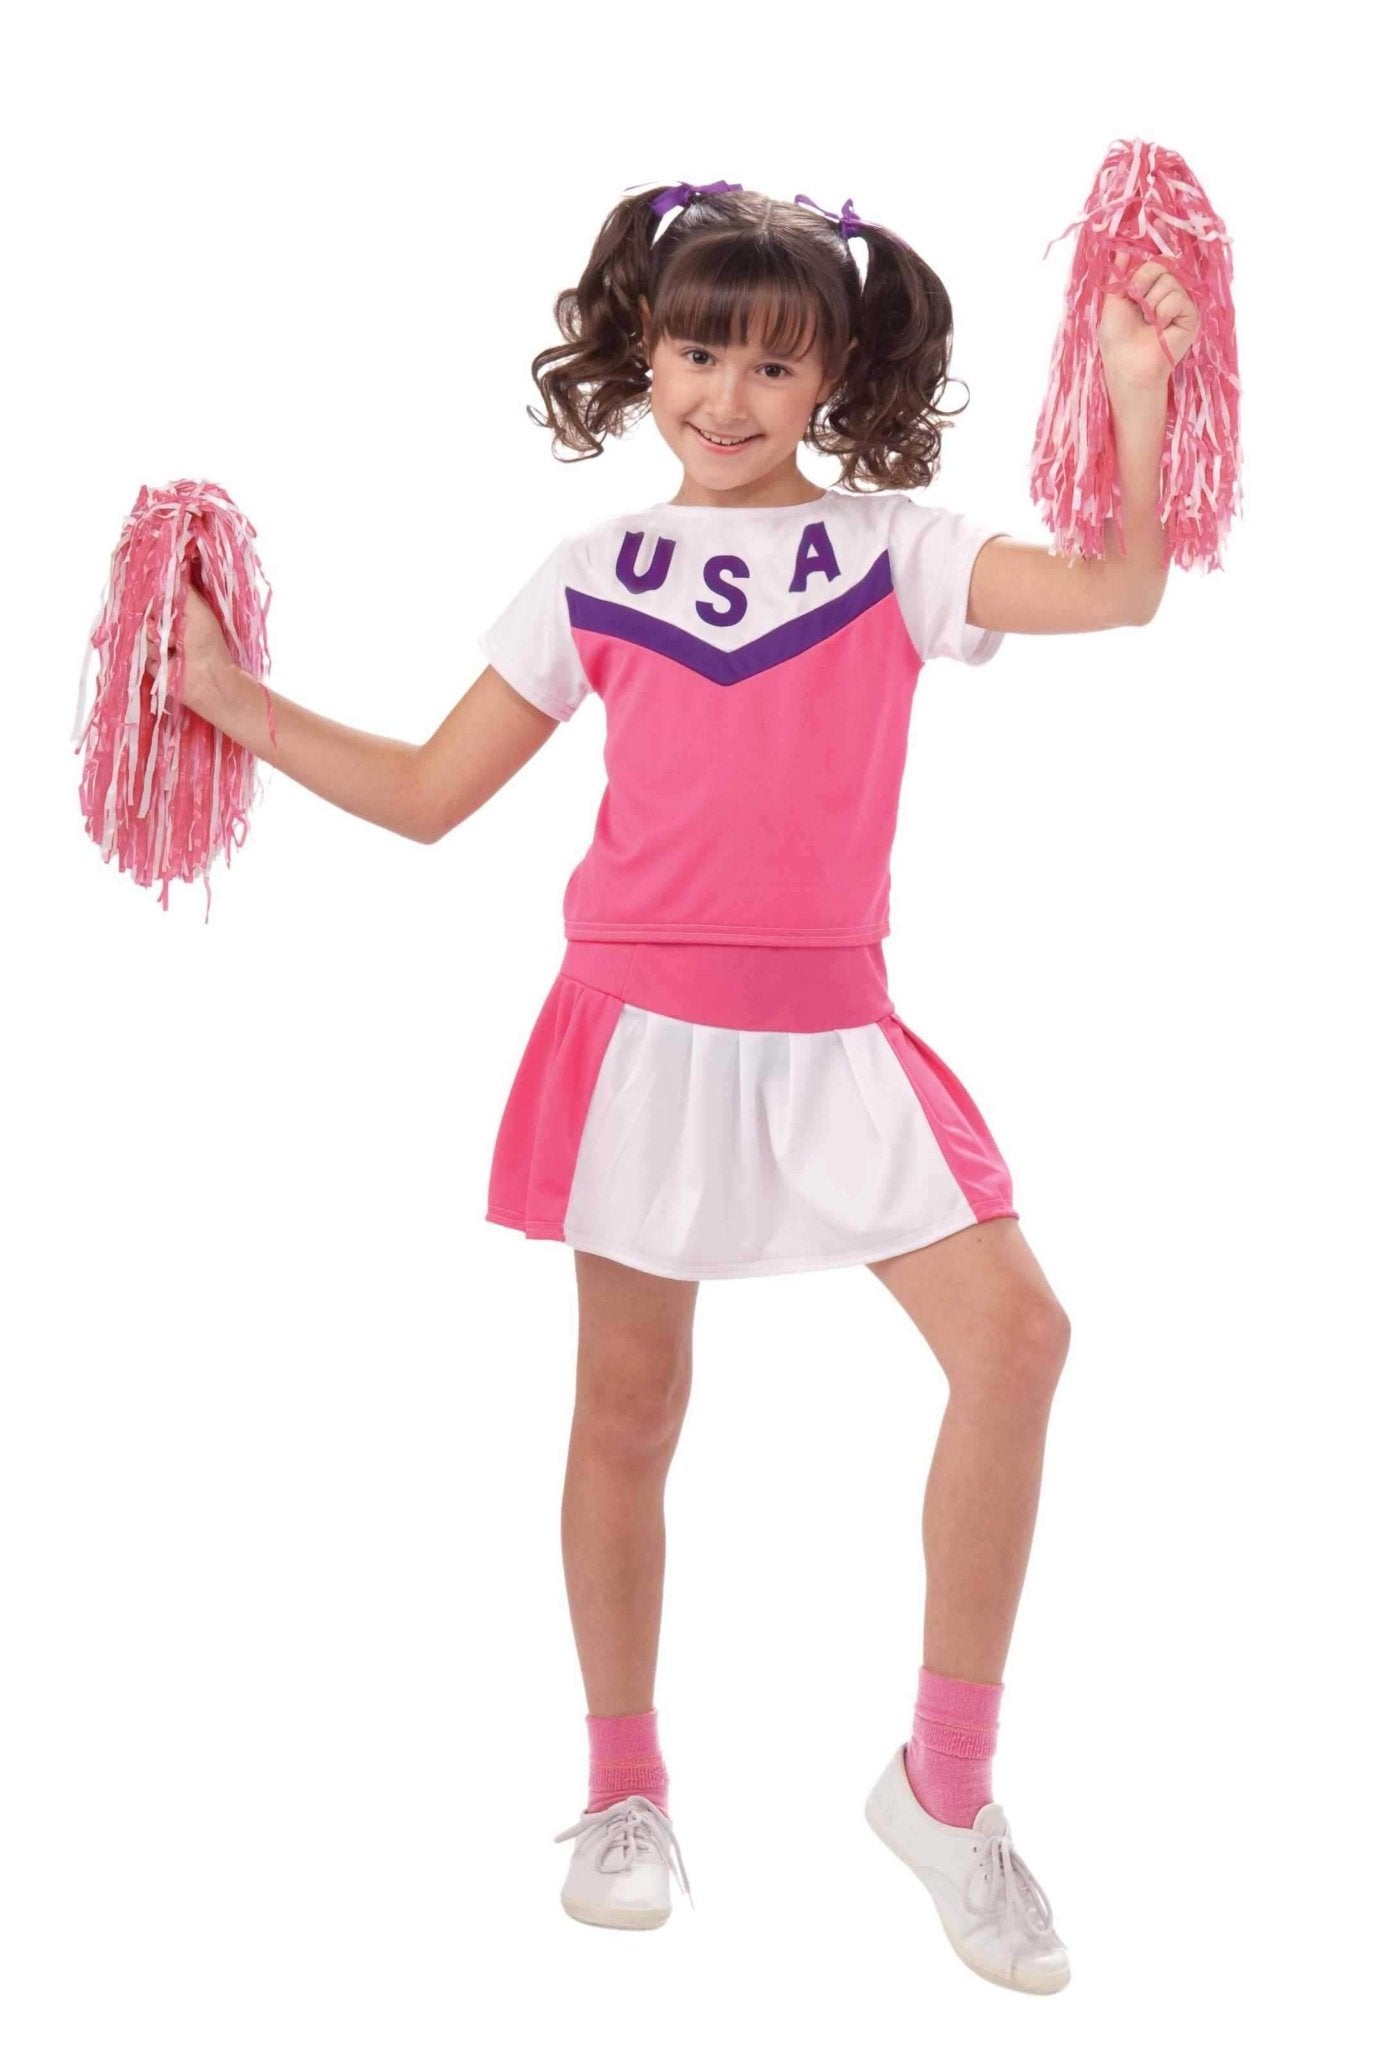 Girls Cheerleader Costume (Large) - JJ's Party House